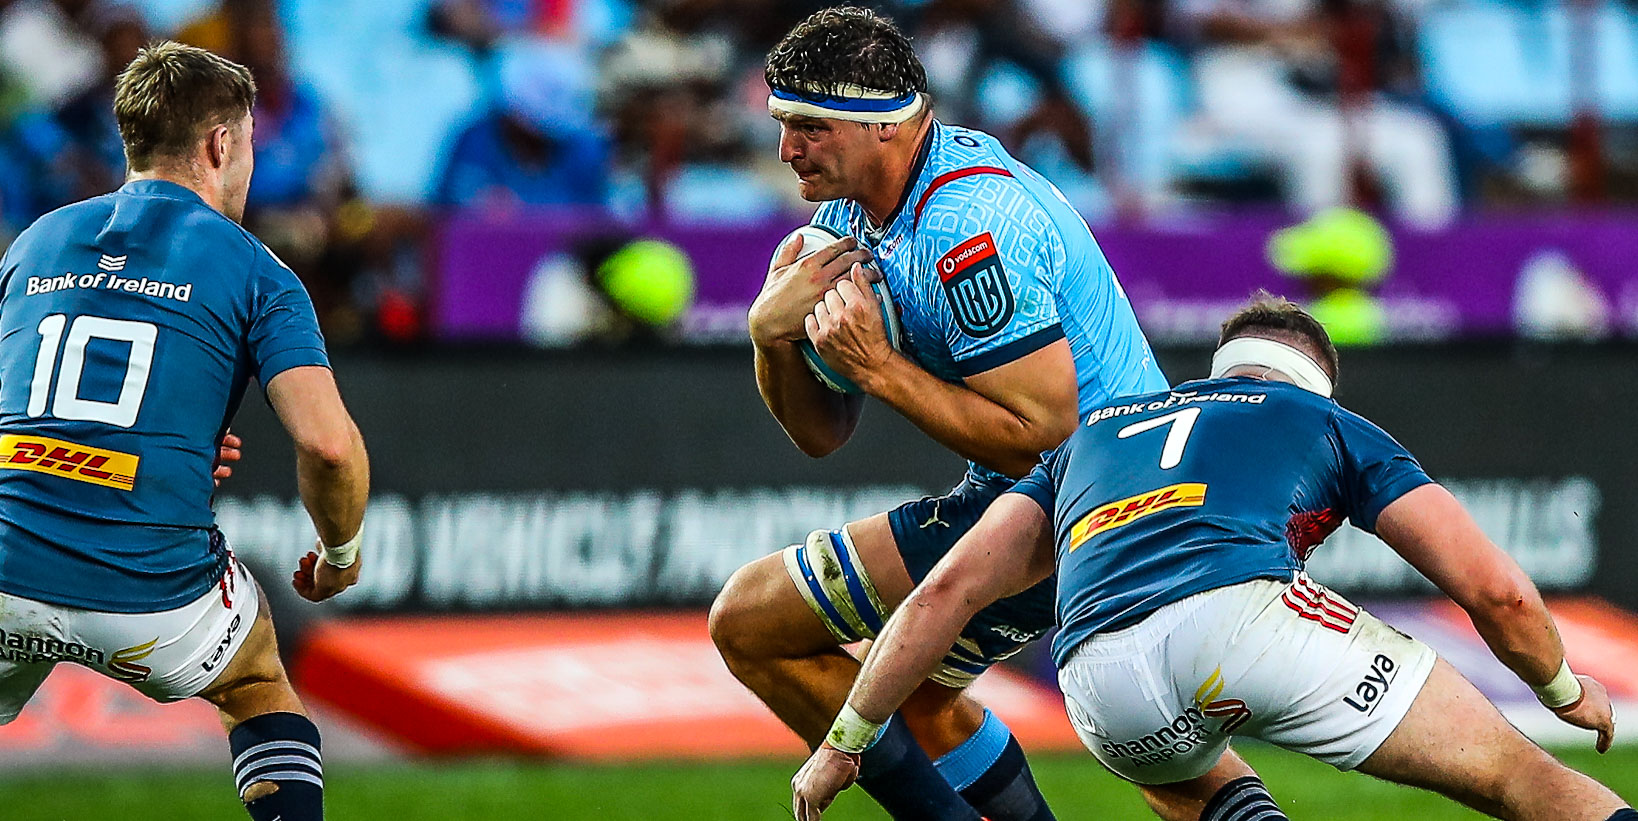 JF van Heerden in action for the Vodacom Bulls against the defending Vodacom URC champions, Munster a few weeks ago.